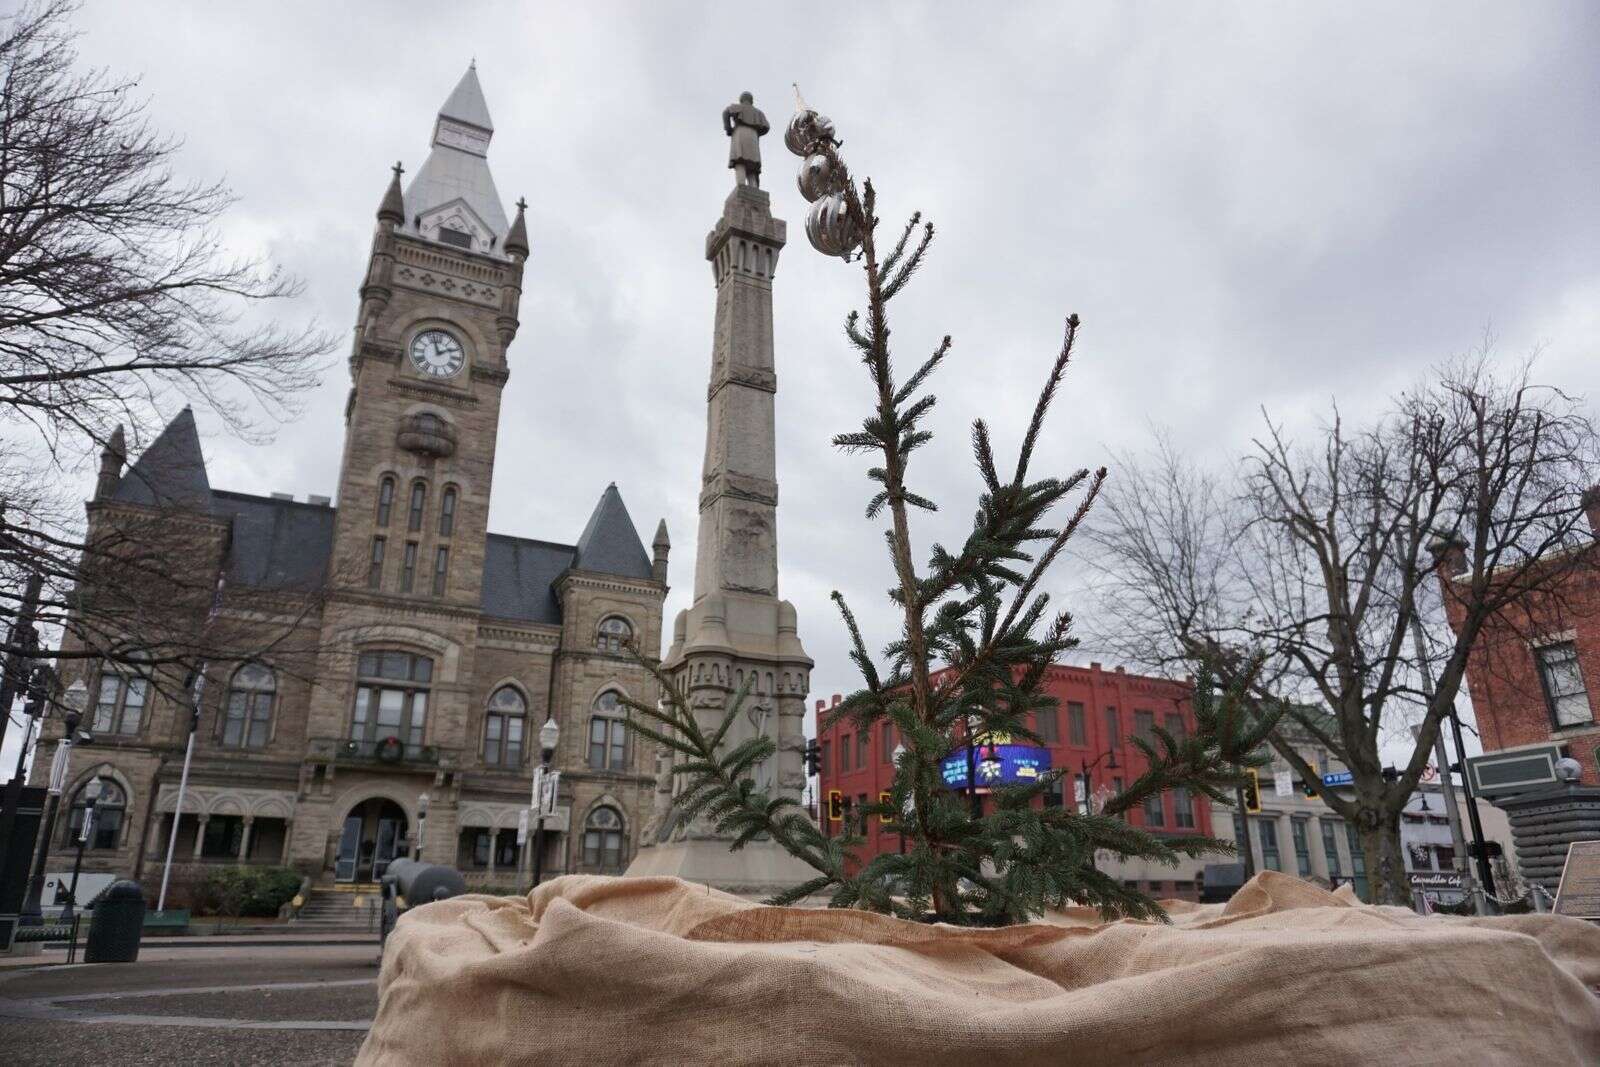 A few twigs are all that remains of the 25-foot Diamond Park Christmas tree 